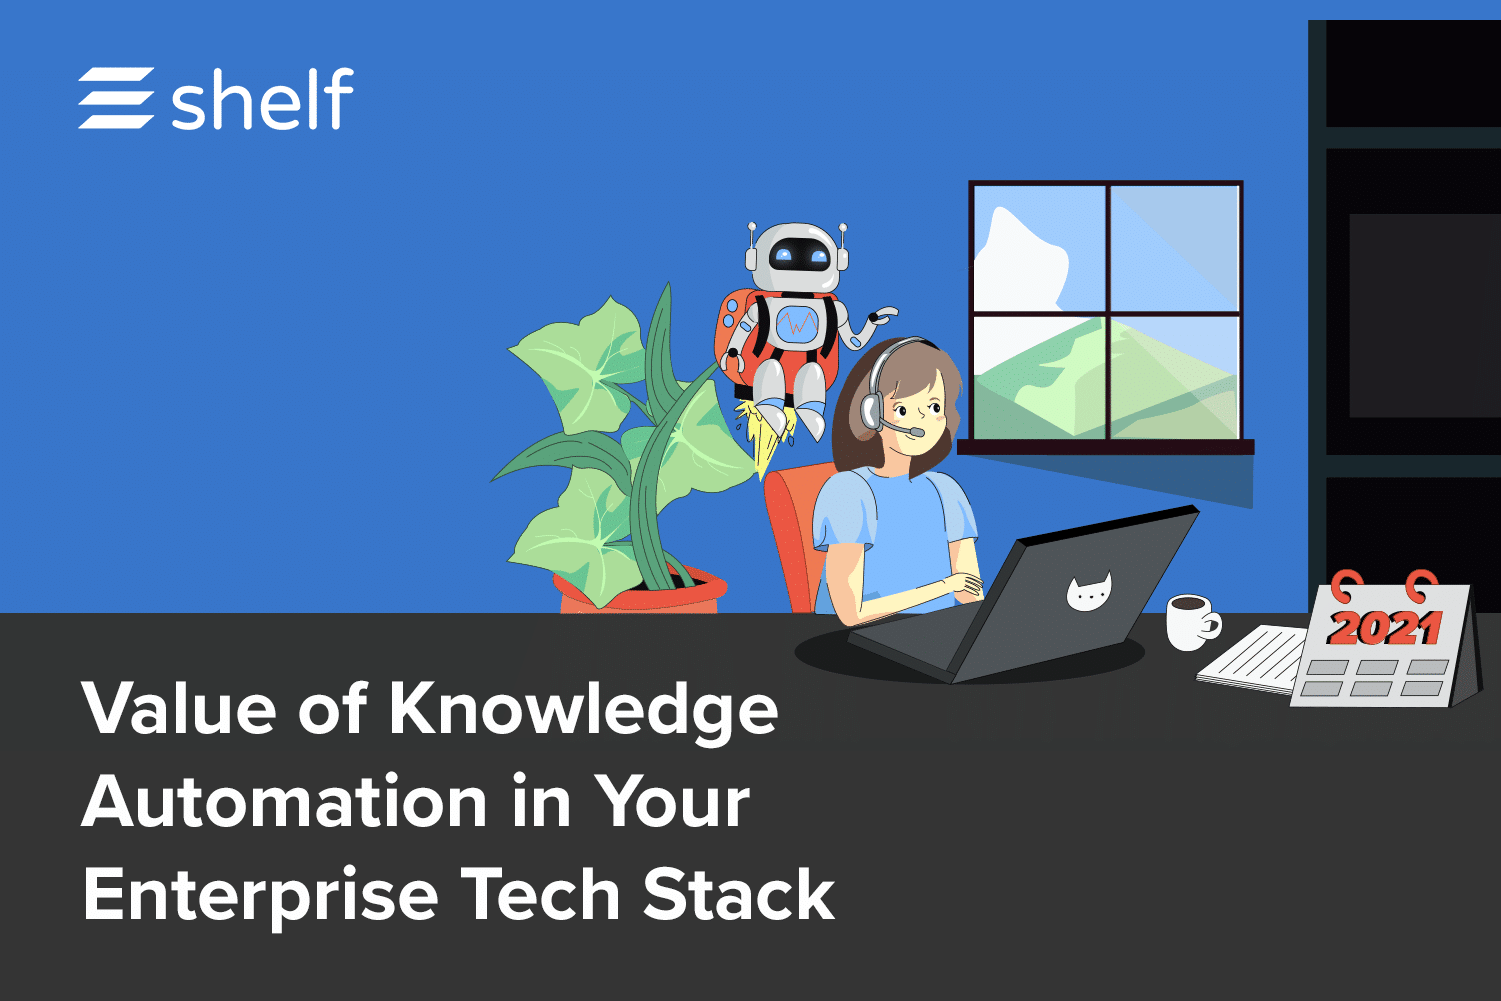 Section II: How Shelf fits into the Enterprise Tech Stack: image 1